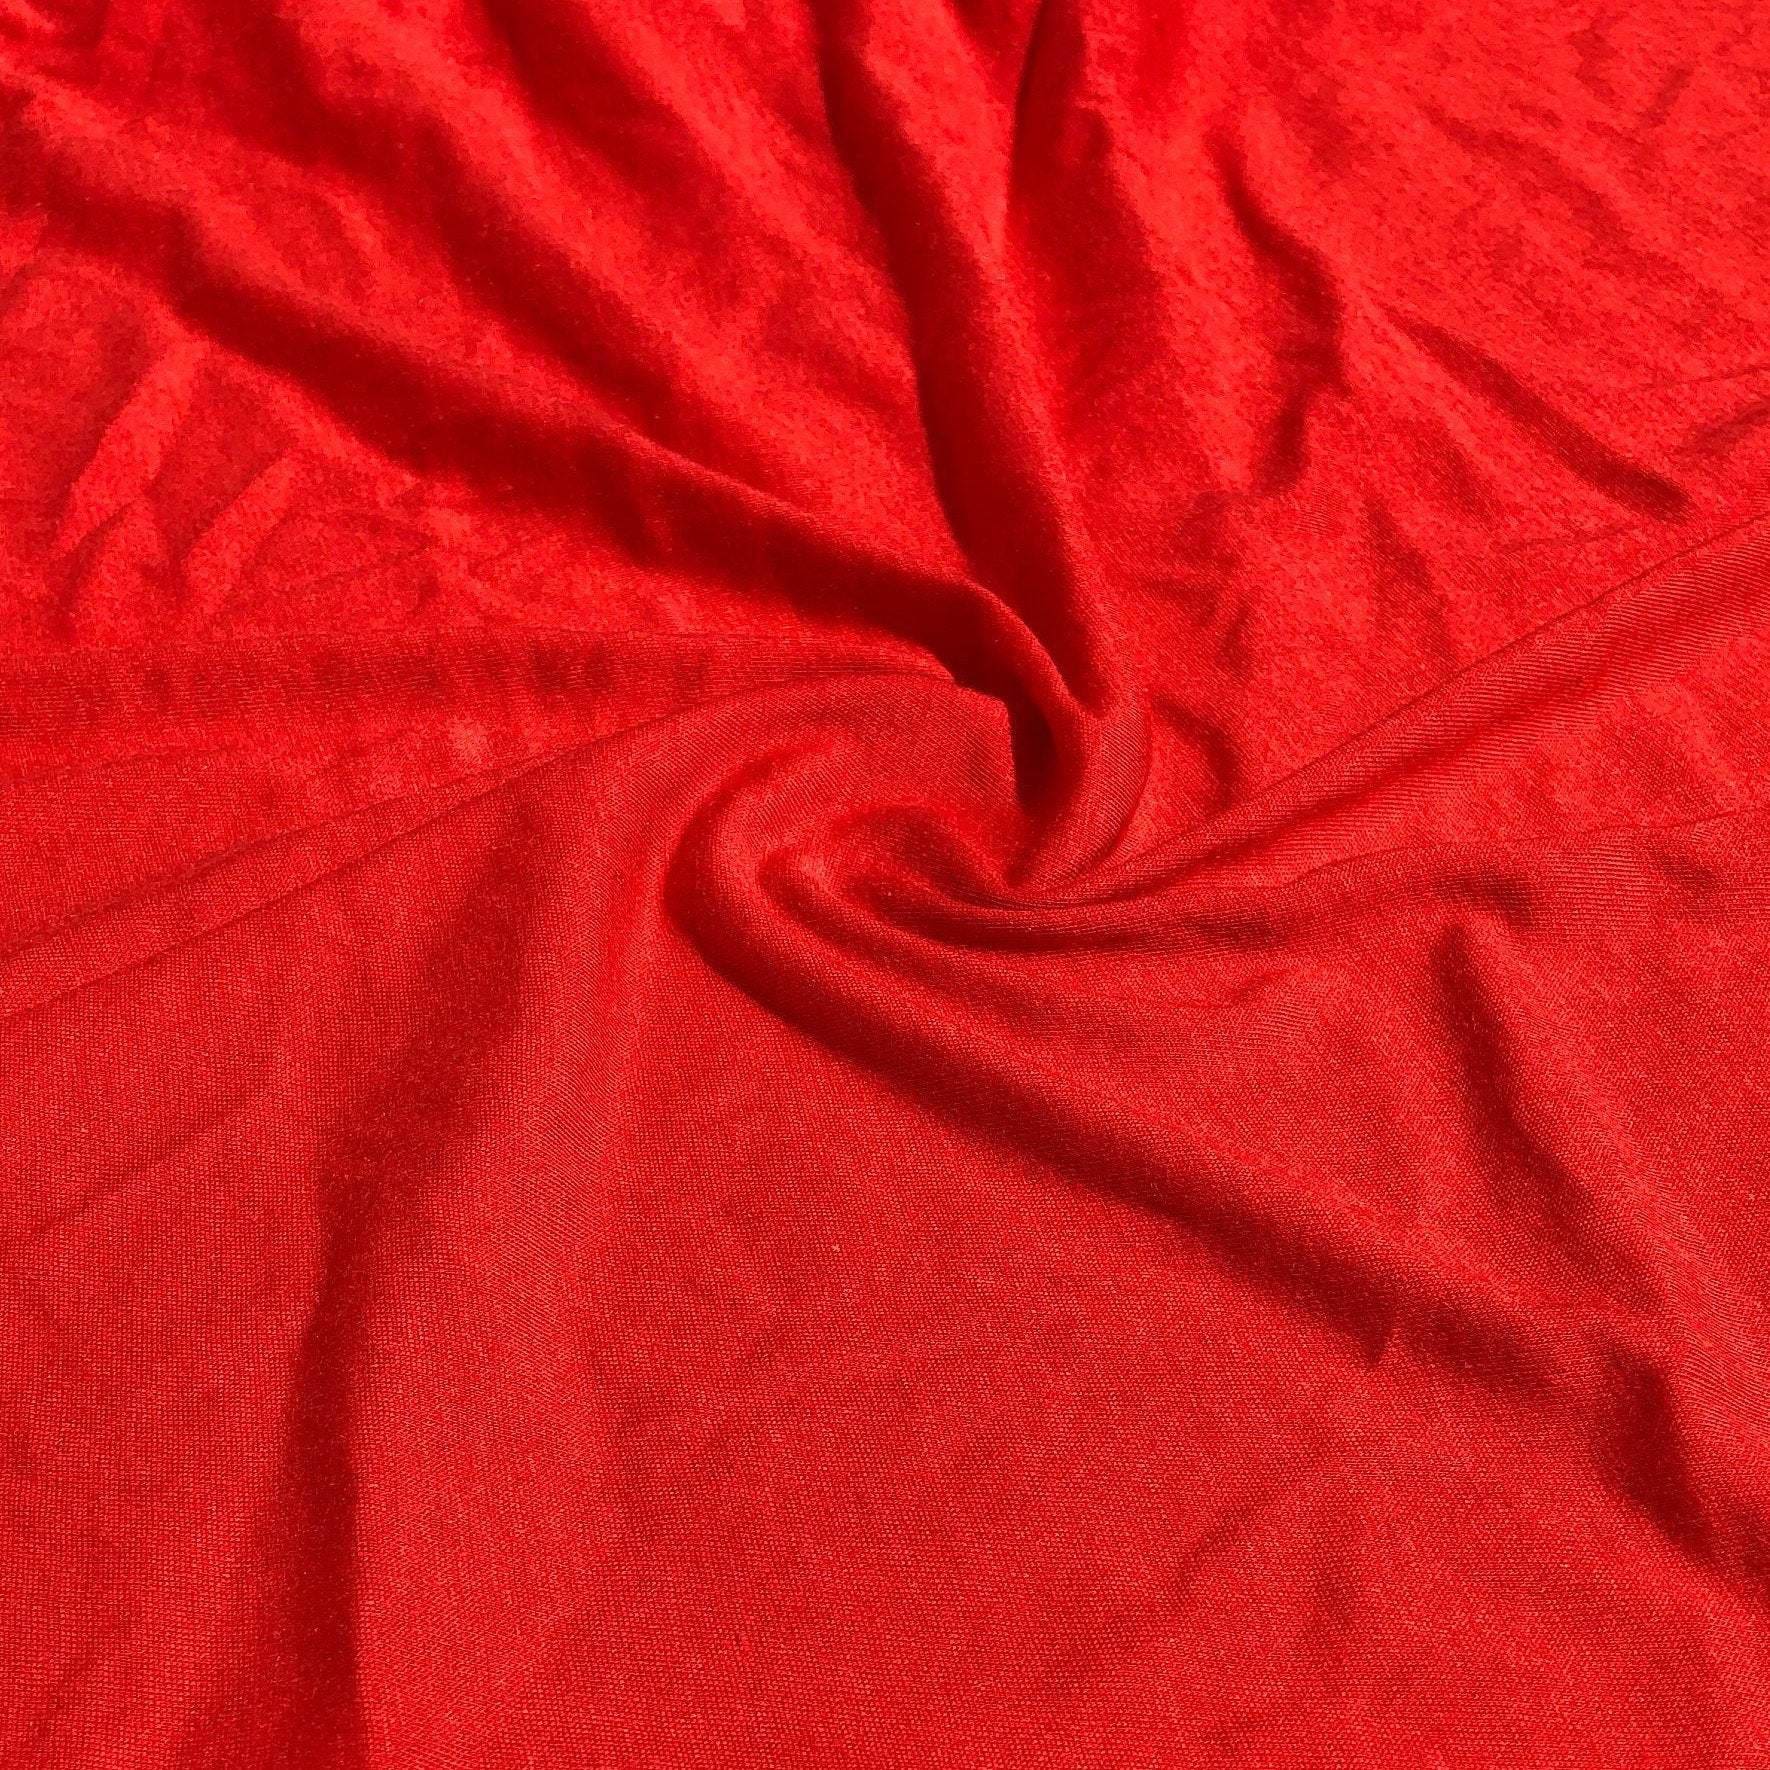 Red Viscose (rayon) Fabric Stock Photo, Picture and Royalty Free